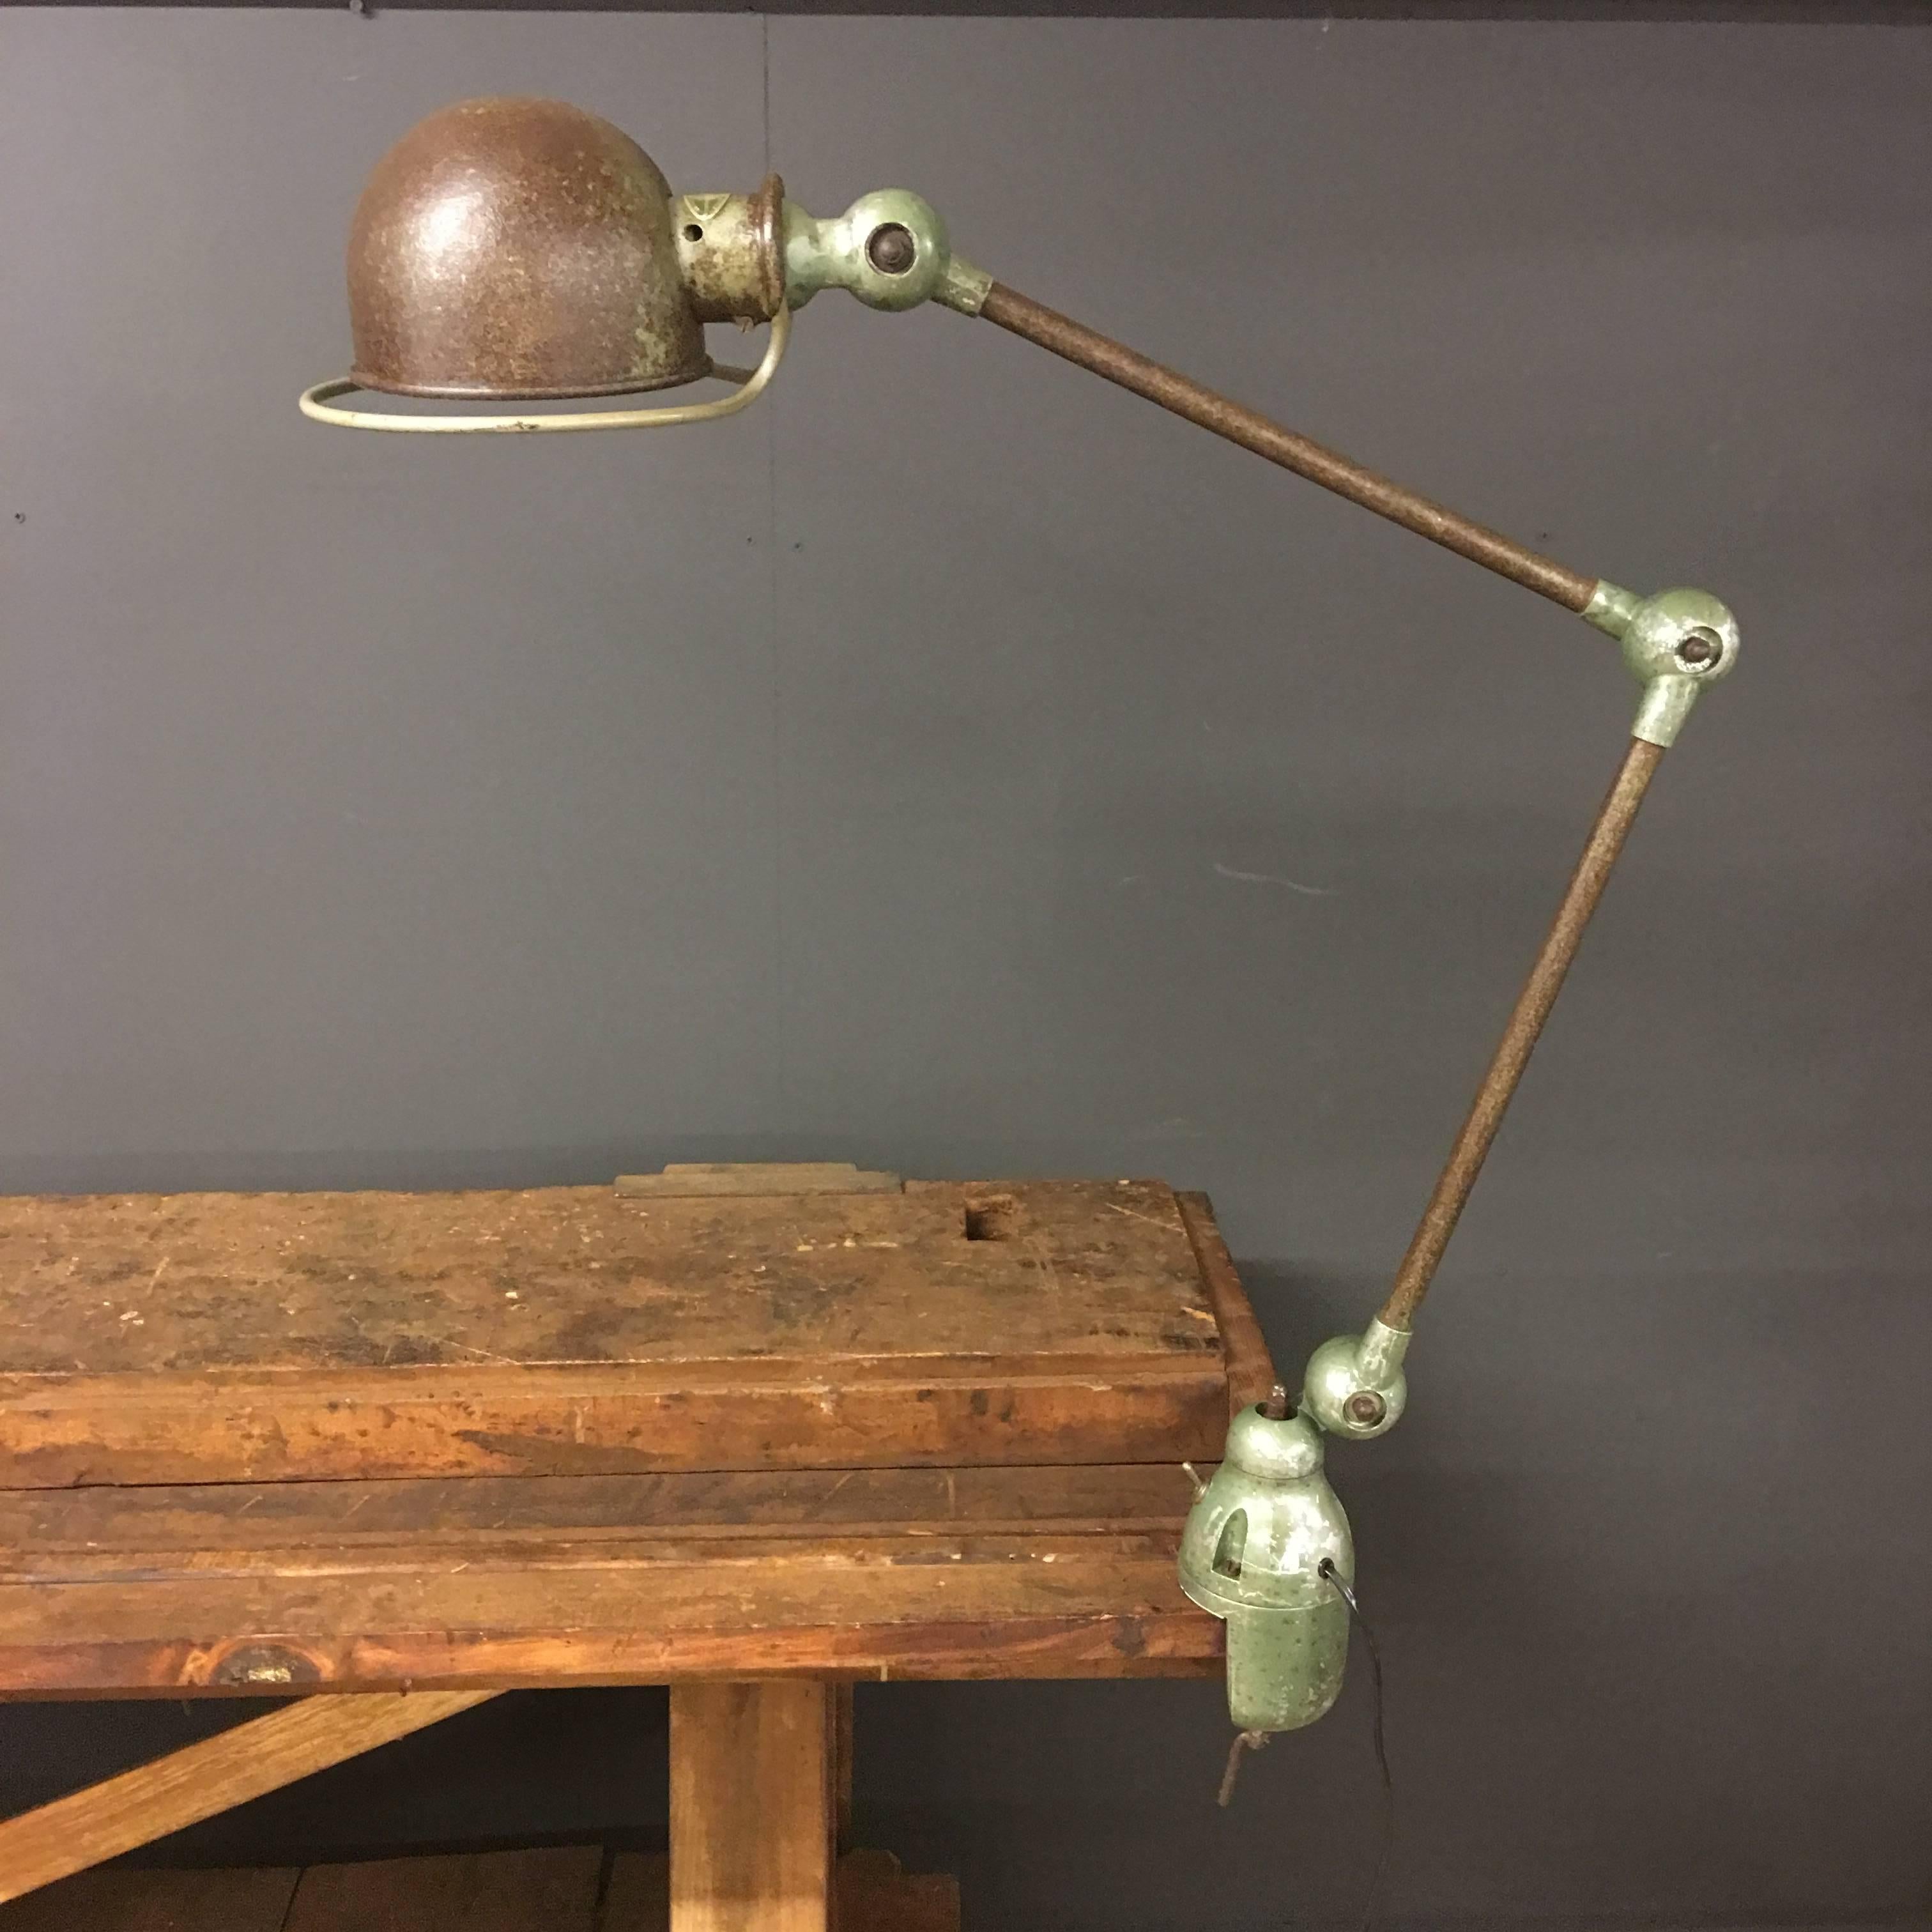 This French Industrial workbench light was designed by Jean-Louis Domecq and manufactured by Jieldé in Lyon, France, during the 1950s.